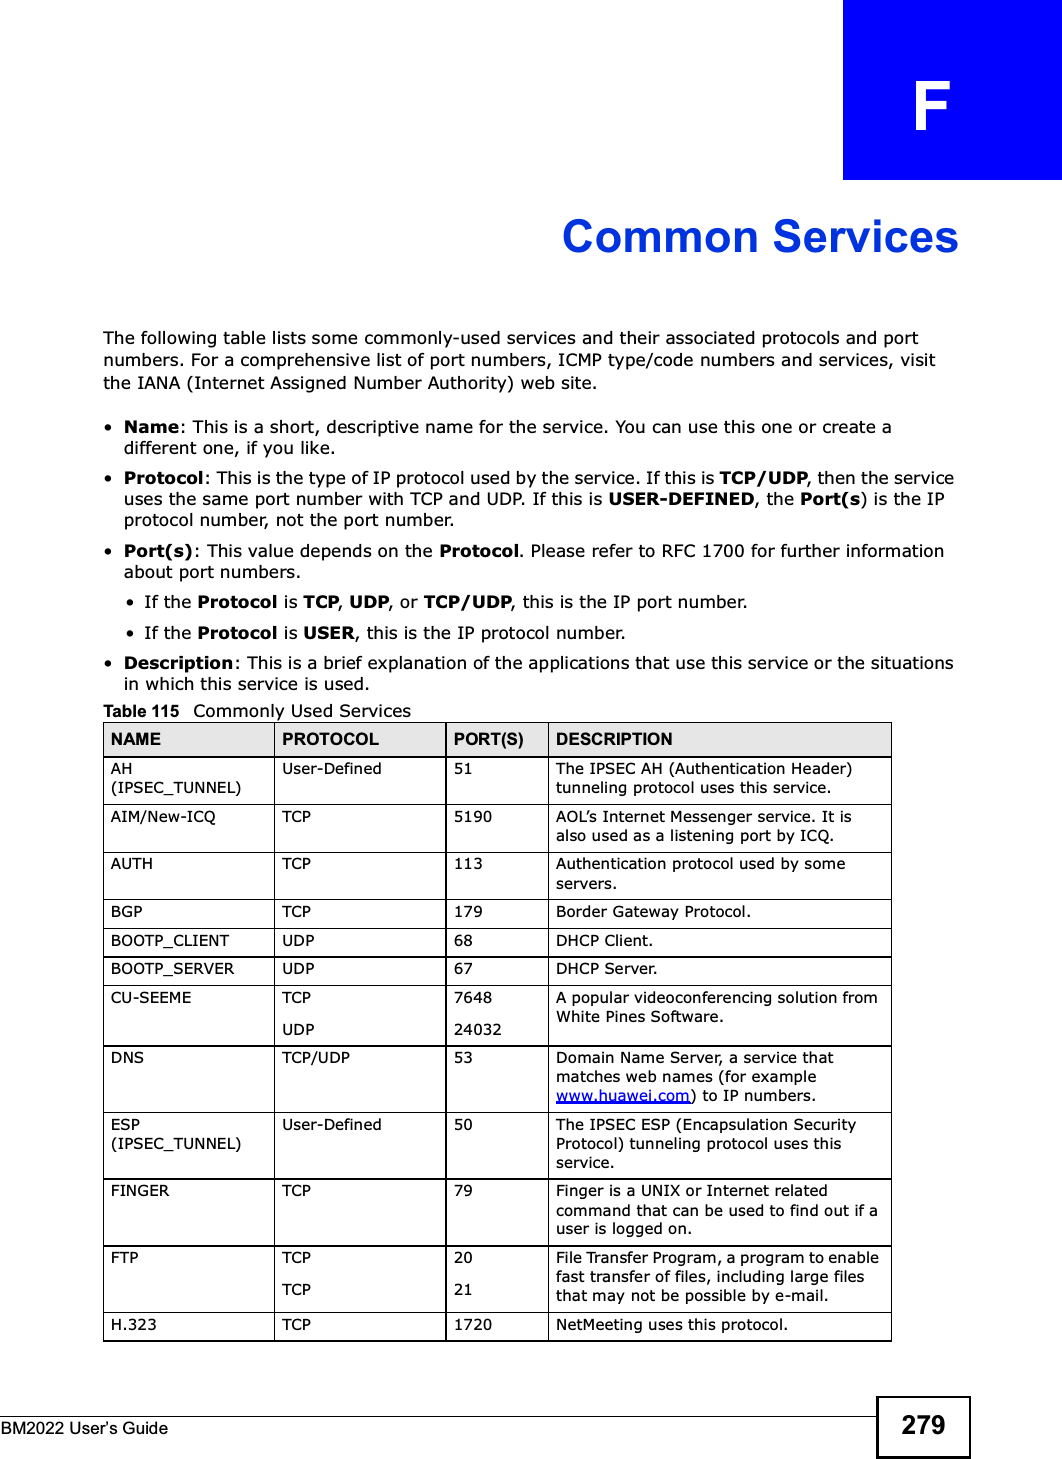 BM2022 Users Guide 279APPENDIX   FCommon ServicesThe following table lists some commonly-used services and their associated protocols and port numbers. For a comprehensive list of port numbers, ICMP type/code numbers and services, visit the IANA (Internet Assigned Number Authority) web site. Name: This is a short, descriptive name for the service. You can use this one or create a different one, if you like.Protocol: This is the type of IP protocol used by the service. If this is TCP/UDP, then the service uses the same port number with TCP and UDP. If this is USER-DEFINED, the Port(s) is the IP protocol number, not the port number.Port(s): This value depends on the Protocol. Please refer to RFC 1700 for further information about port numbers.If the Protocol is TCP, UDP, or TCP/UDP, this is the IP port number.If the Protocol is USER, this is the IP protocol number.Description: This is a brief explanation of the applications that use this service or the situations in which this service is used.Table 115   Commonly Used ServicesNAME PROTOCOL PORT(S) DESCRIPTIONAH (IPSEC_TUNNEL)User-Defined 51 The IPSEC AH (Authentication Header) tunneling protocol uses this service.AIM/New-ICQ TCP 5190 AOLs Internet Messenger service. It is also used as a listening port by ICQ.AUTH TCP 113 Authentication protocol used by some servers.BGP TCP 179 Border Gateway Protocol.BOOTP_CLIENT UDP 68 DHCP Client.BOOTP_SERVER UDP 67 DHCP Server.CU-SEEME TCPUDP764824032A popular videoconferencing solution from White Pines Software.DNS TCP/UDP 53 Domain Name Server, a service that matches web names (for example www.huawei.com) to IP numbers.ESP (IPSEC_TUNNEL)User-Defined 50 The IPSEC ESP (Encapsulation Security Protocol) tunneling protocol uses this service.FINGER TCP 79 Finger is a UNIX or Internet related command that can be used to find out if a user is logged on.FTP TCPTCP2021File Transfer Program, a program to enable fast transfer of files, including large files that may not be possible by e-mail.H.323 TCP 1720 NetMeeting uses this protocol.